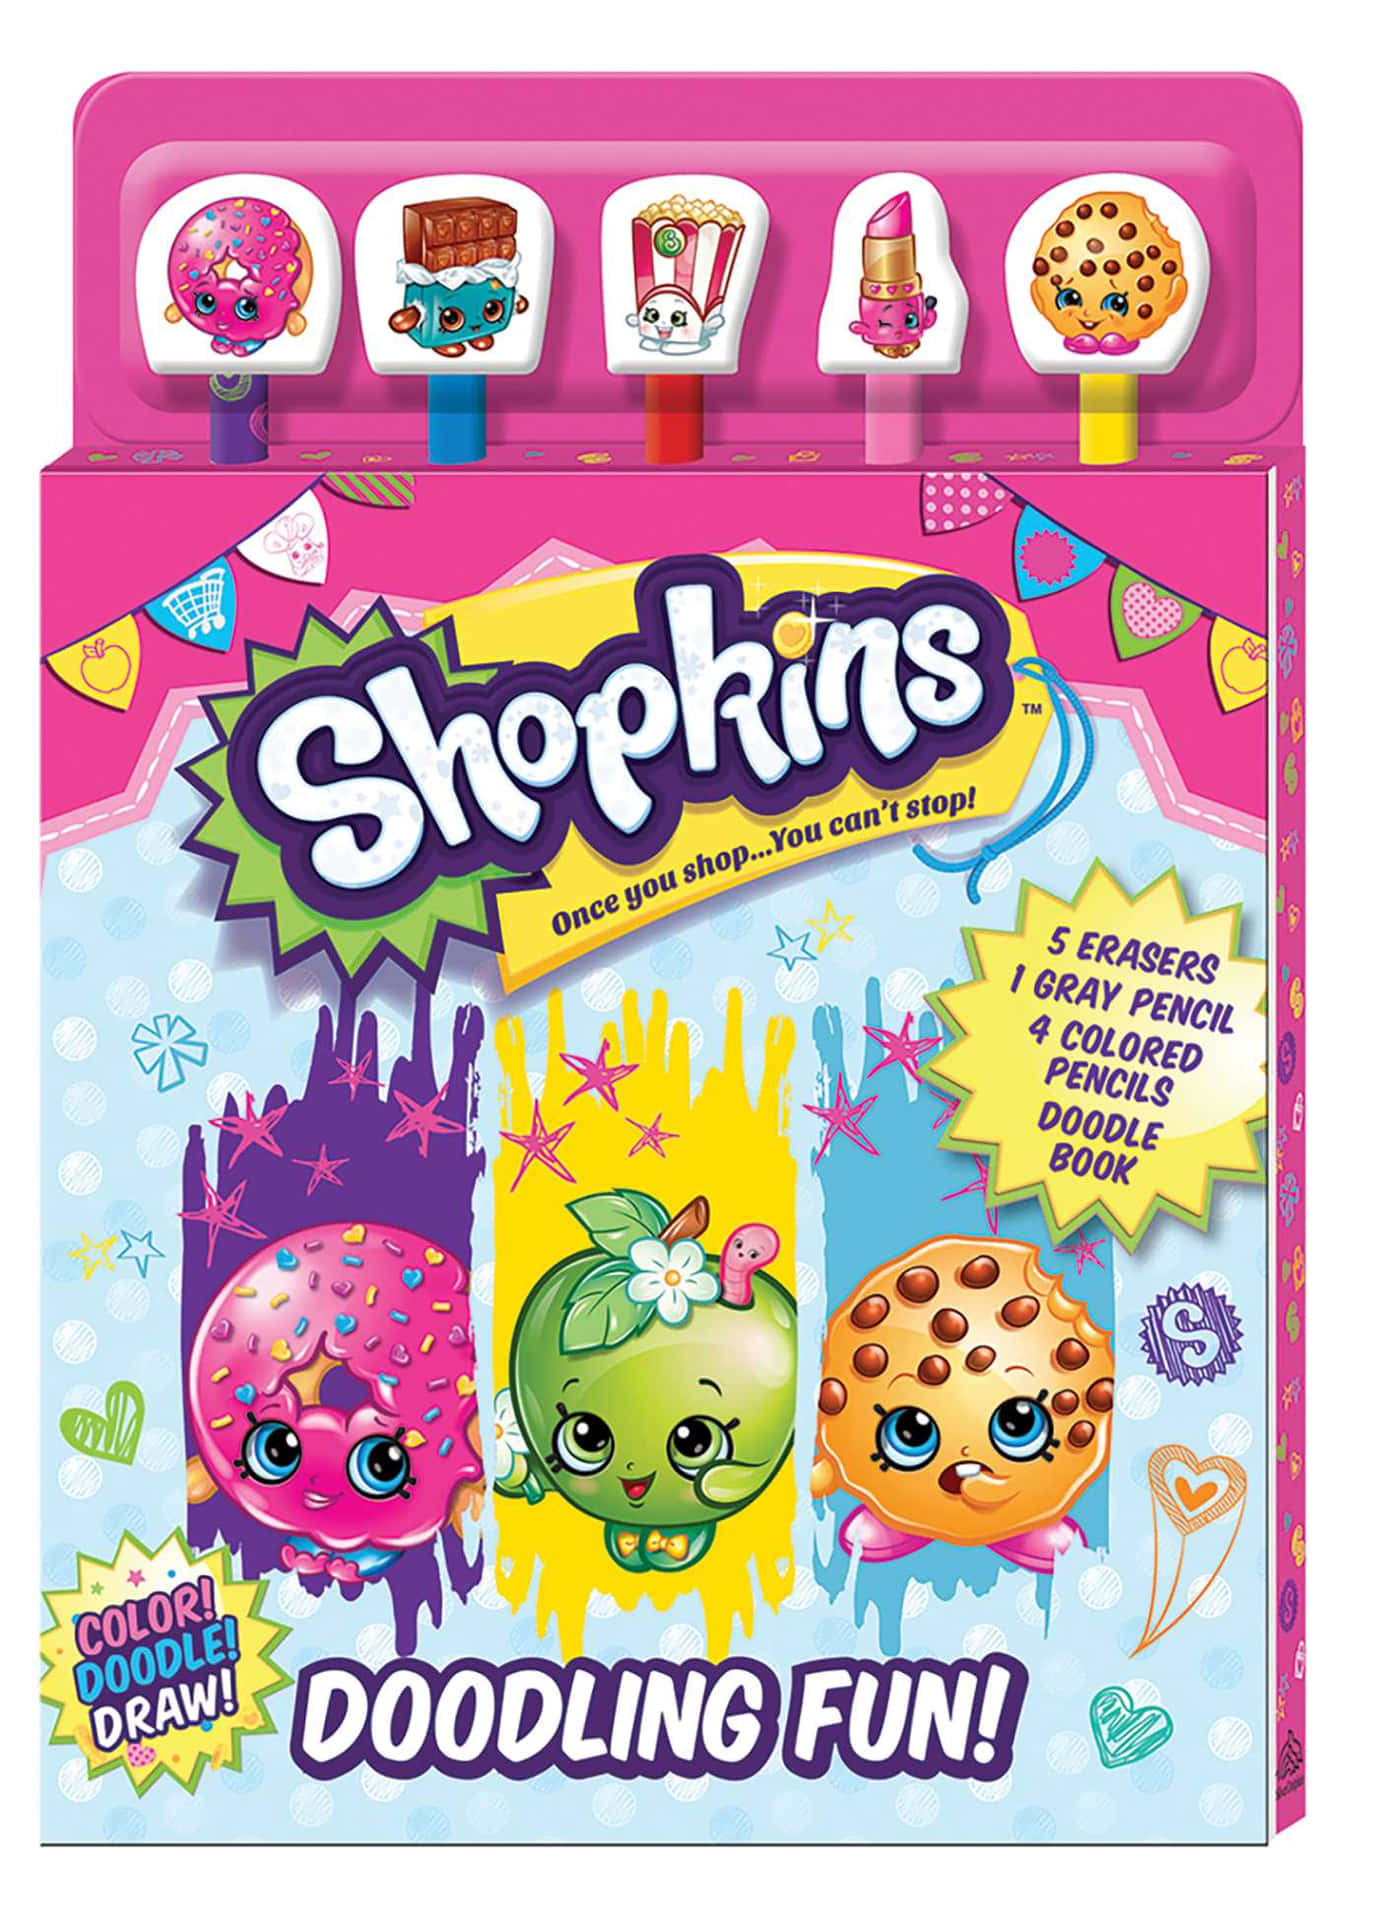 A Shopkins Party - Vibrant and Colorful Characters Enjoying Sweet Treats!